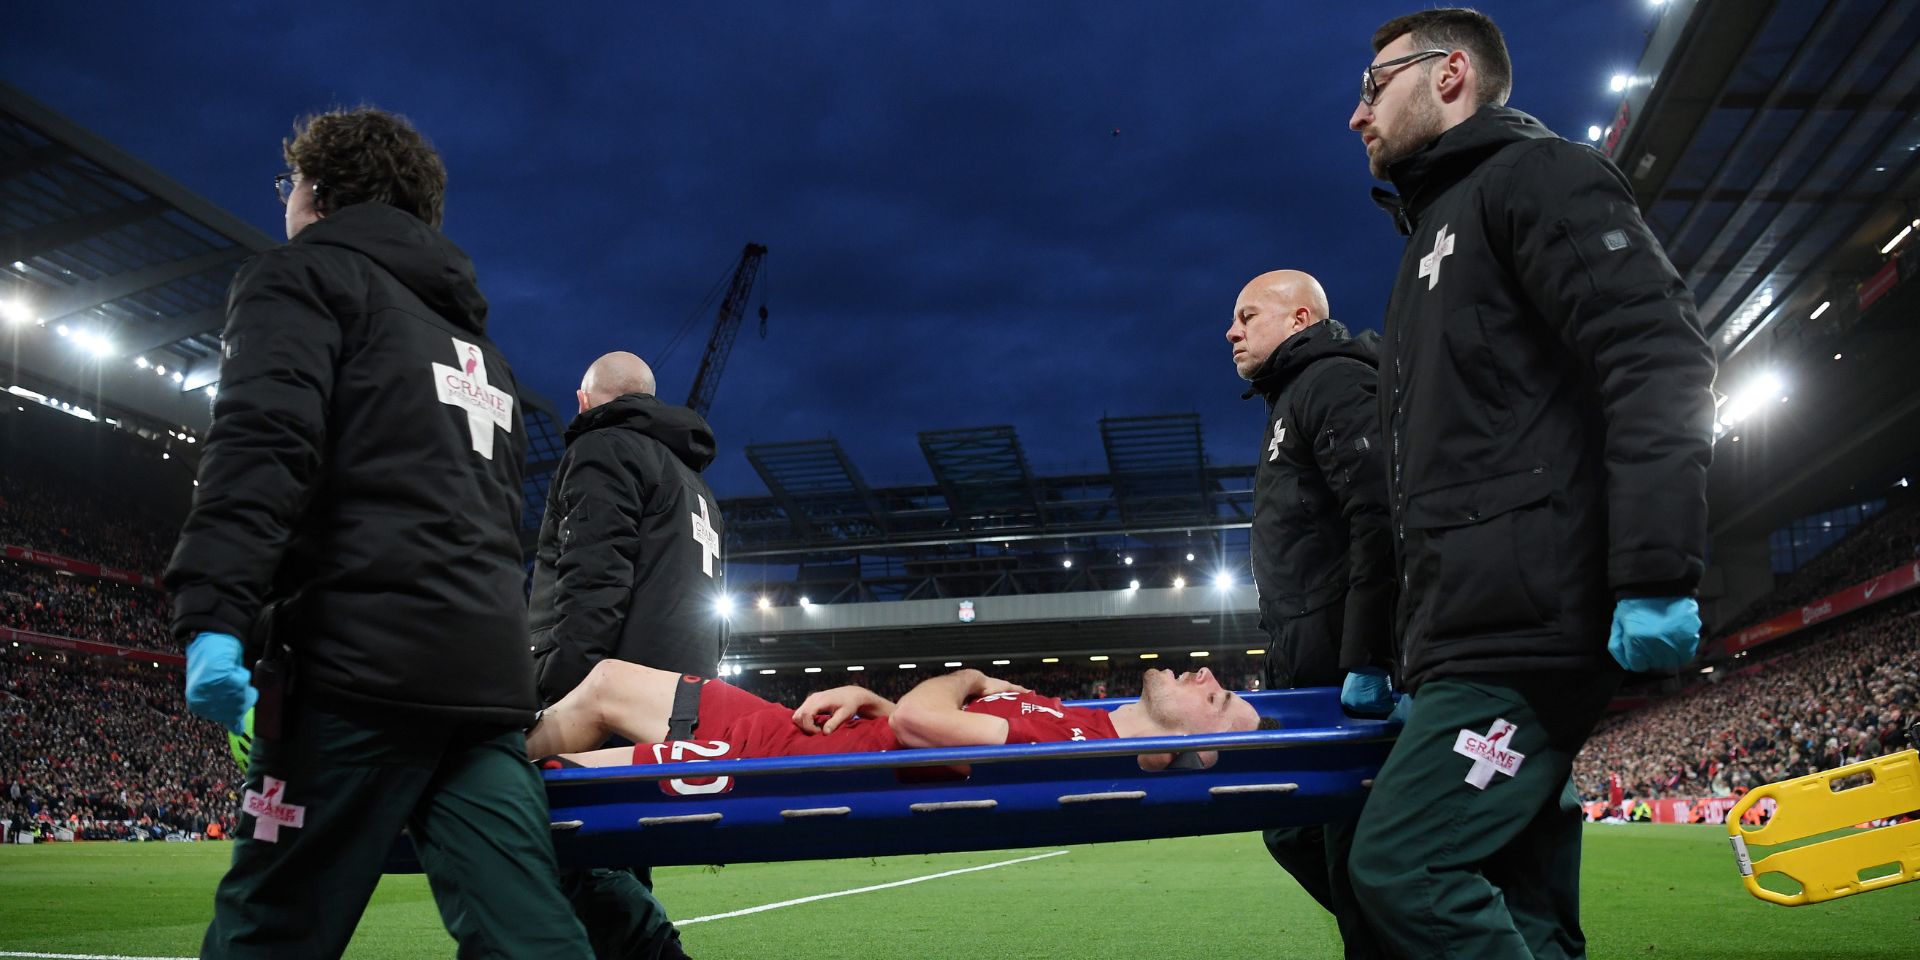 13-man injury update ahead of facing Ajax in the Champions League